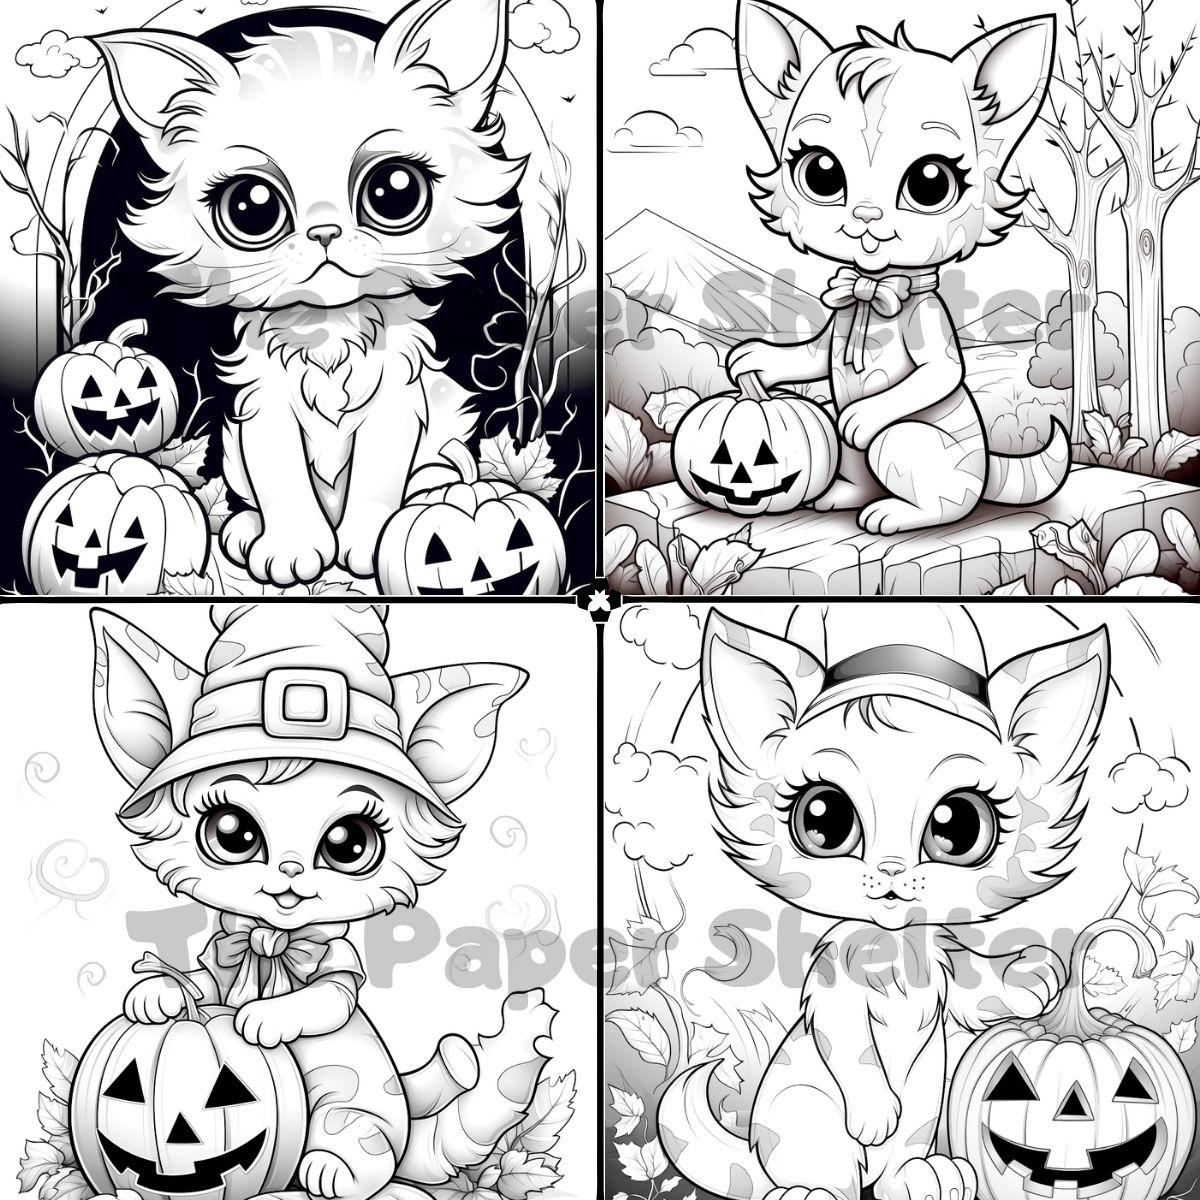 Halloween Kittens - Digital Coloring Book - Click Image to Close